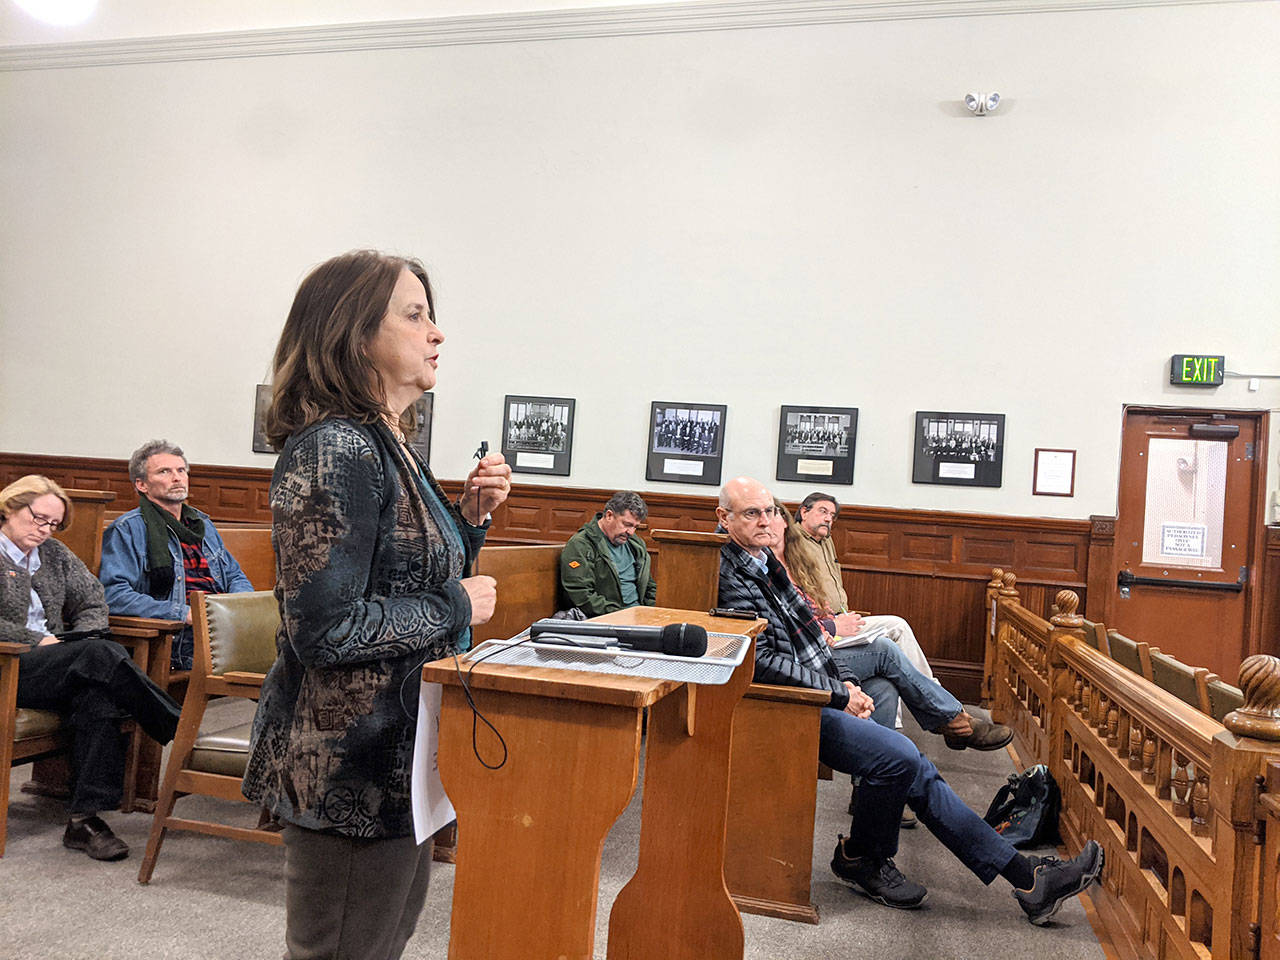 District 2 planning commissioner Lorna Smith speaks at the public hearing for the Jefferson County Critical Areas Ordinance update Monday night in the Superior Courtroom of the Jefferson County Courthouse. (Zach Jablonski/Peninsula Daily News)